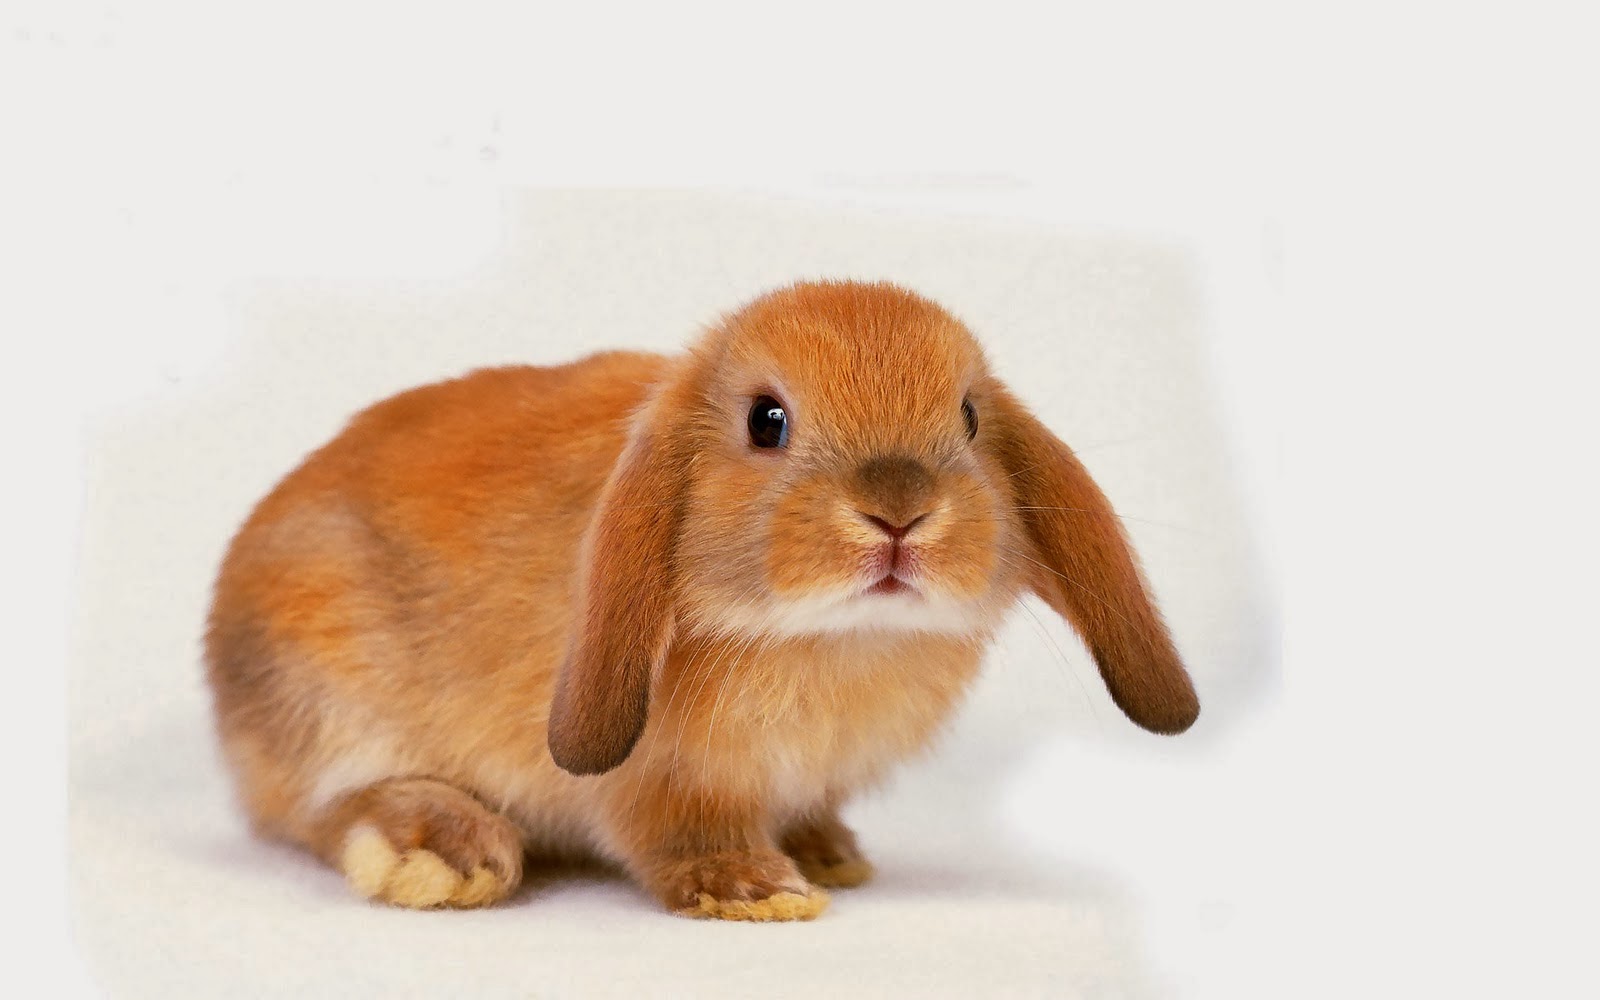  HD Wallpapers Free Downloads Beautiful Baby Rabbits Wallpapers